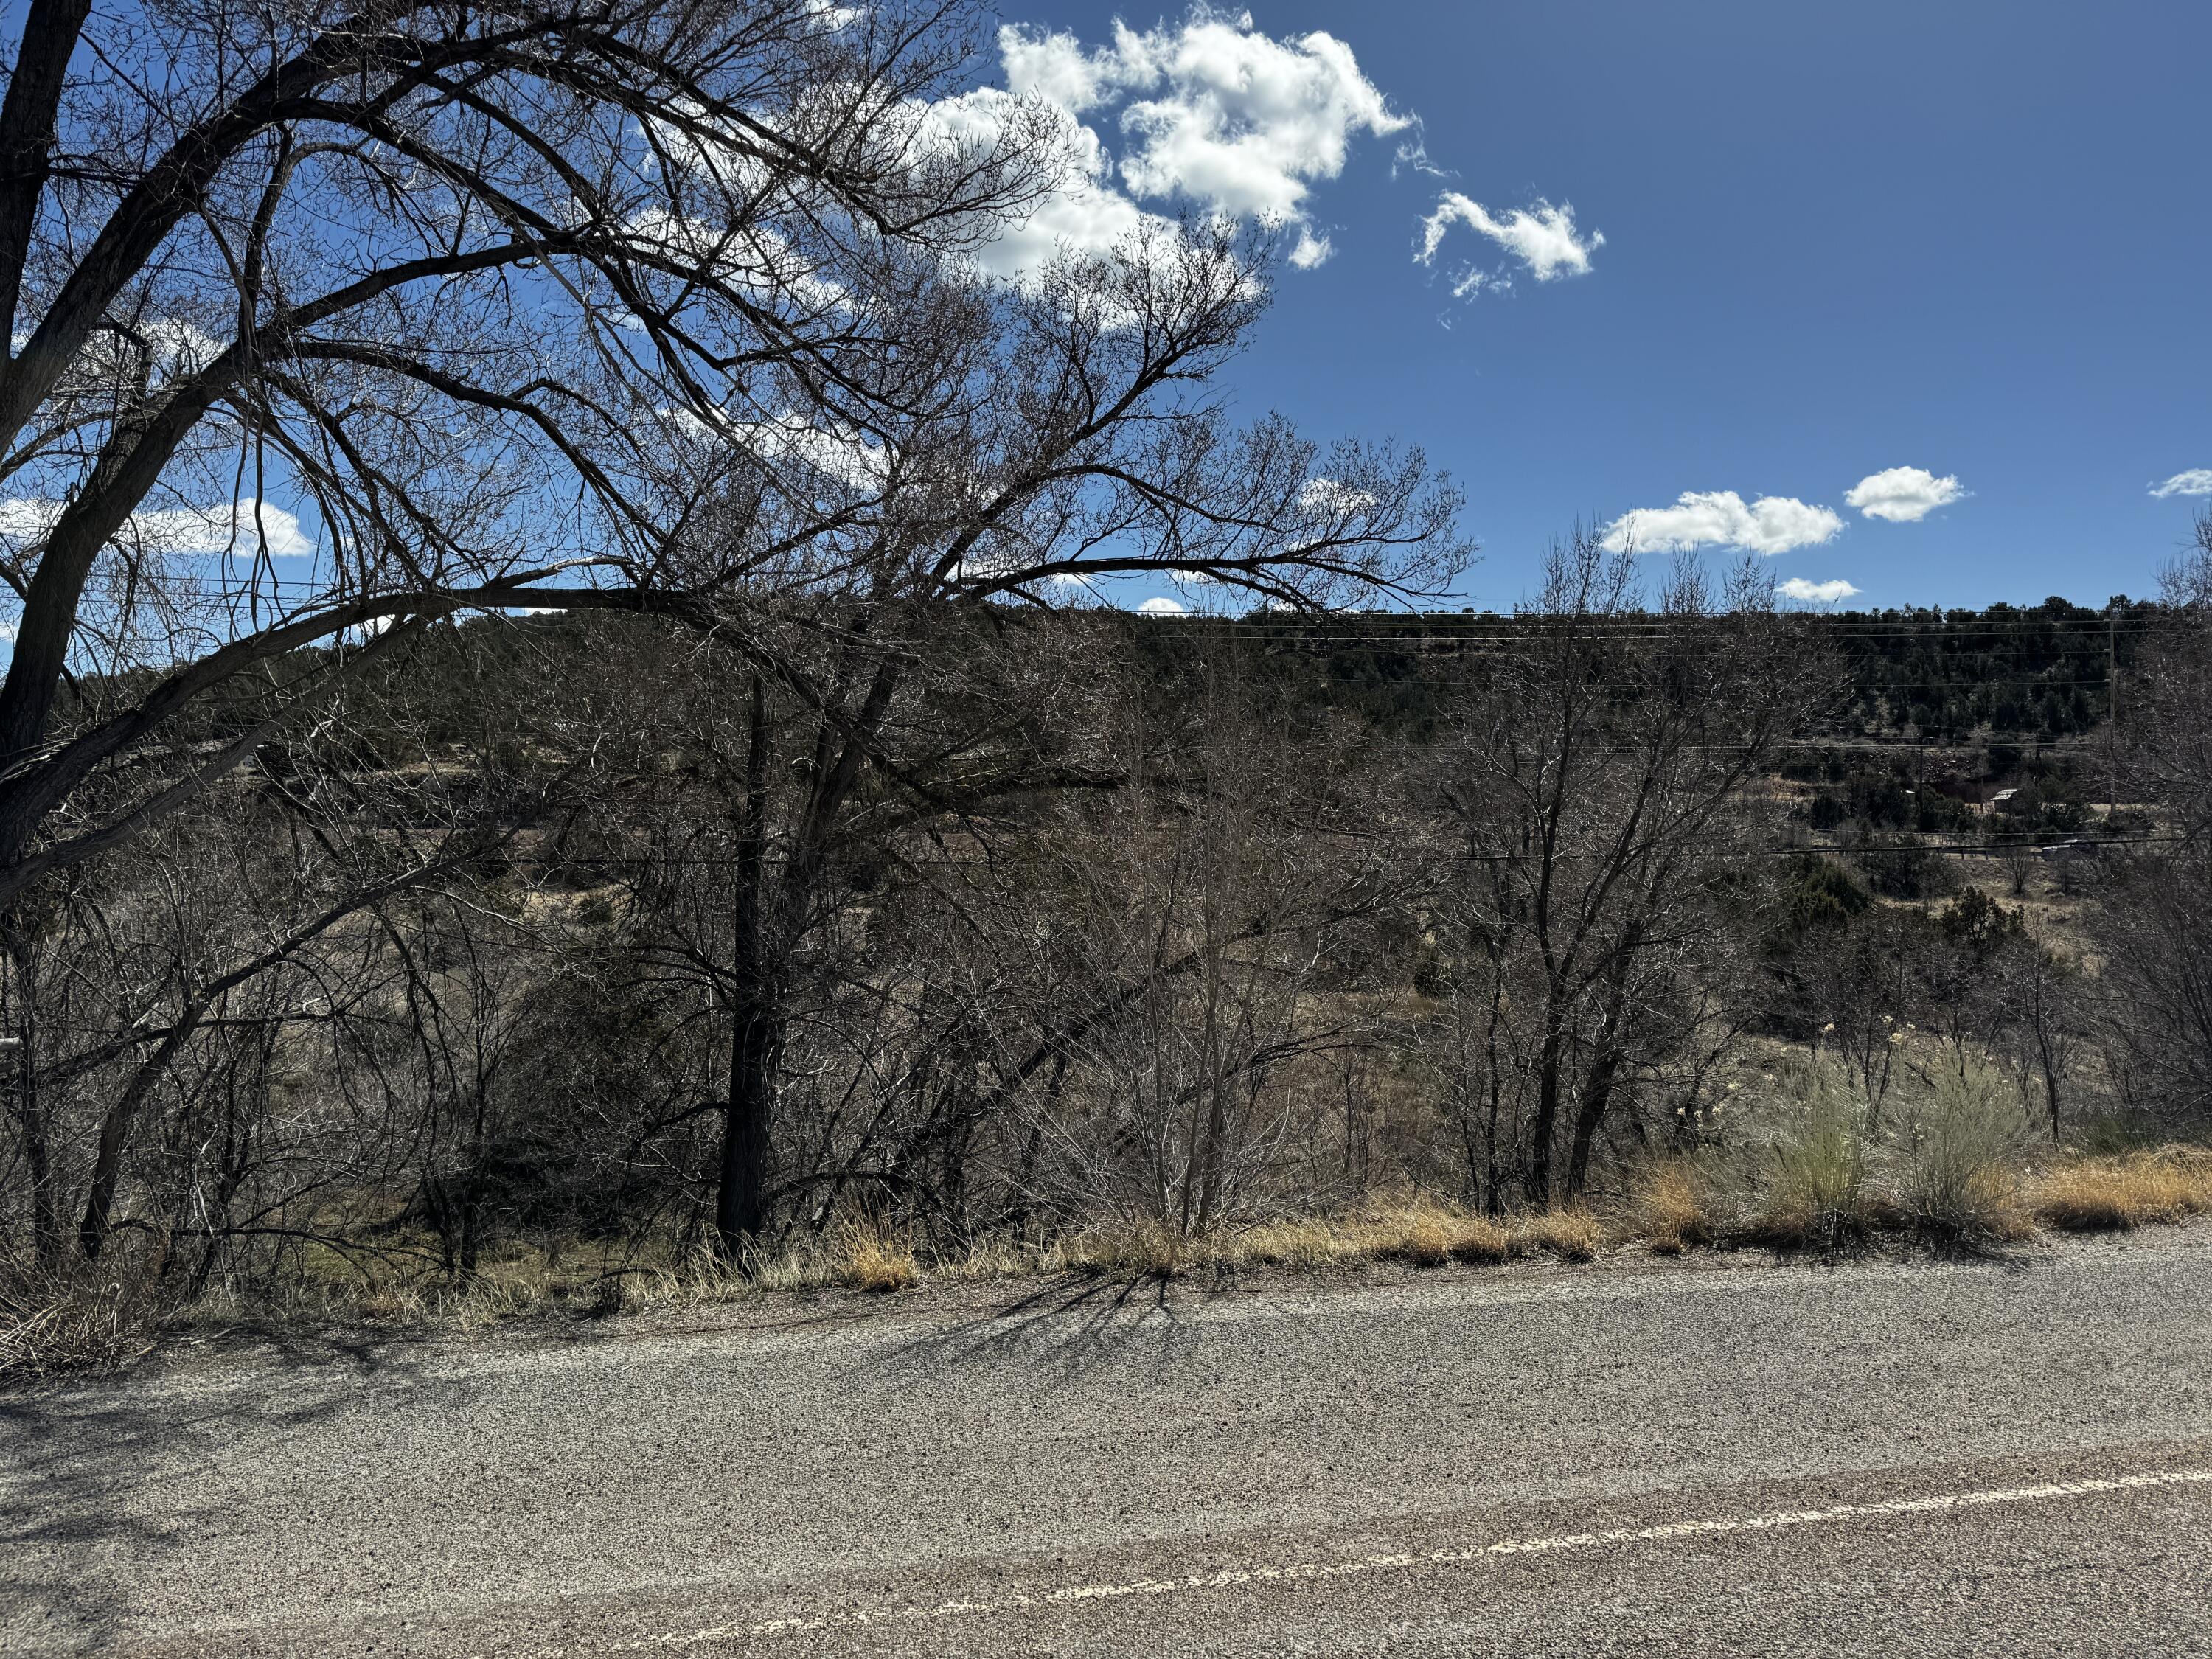 Nm 333, Tijeras, New Mexico 87059, ,Land,For Sale, Nm 333,1058631